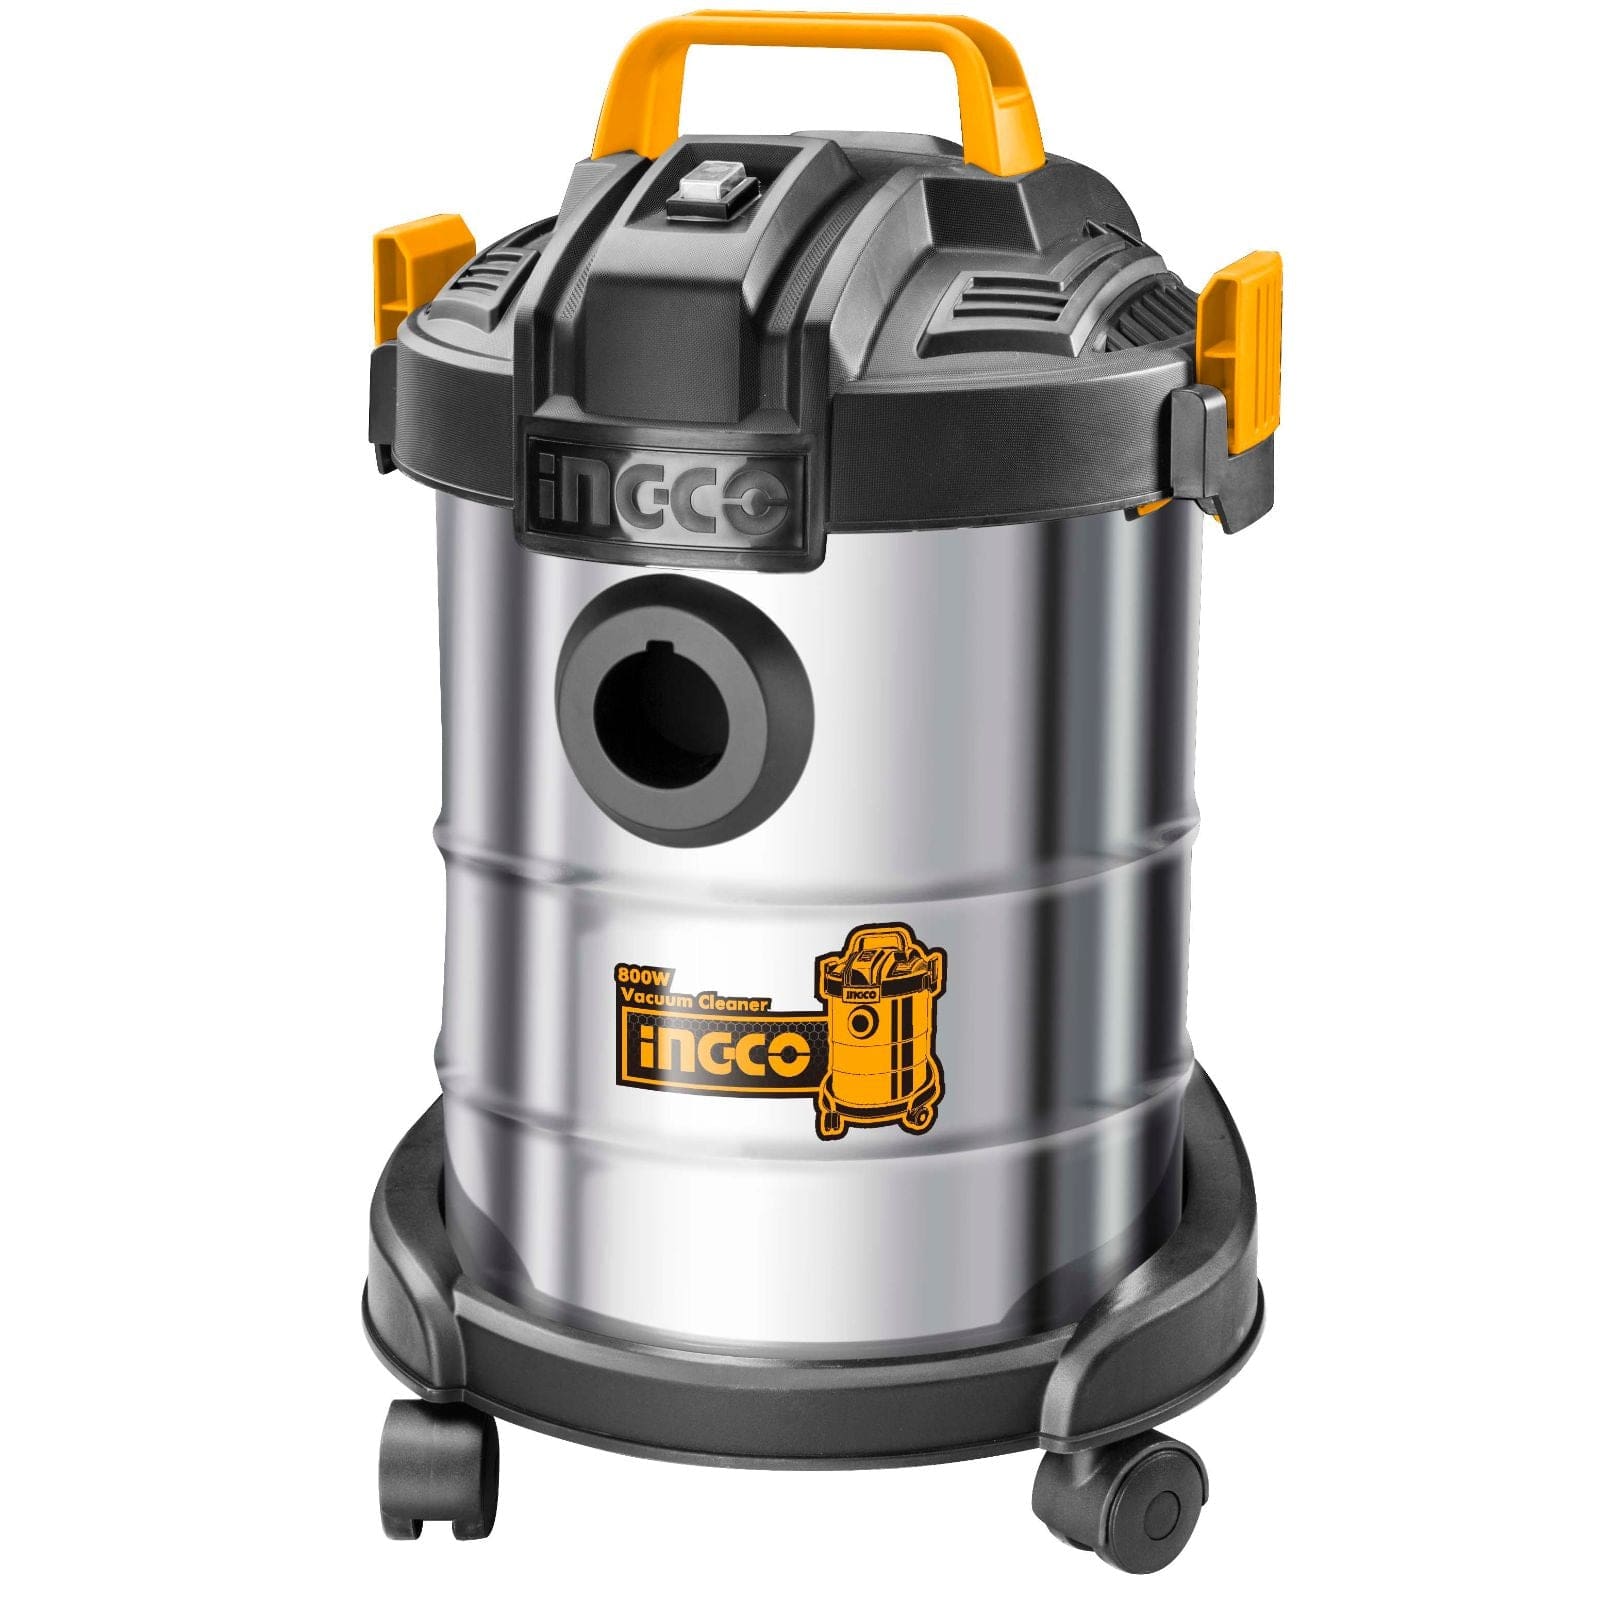 Ingco 12L Vacuum Cleaner - VC14122 | Supply Master | Accra, Ghana Steam & Vacuum Cleaner Buy Tools hardware Building materials